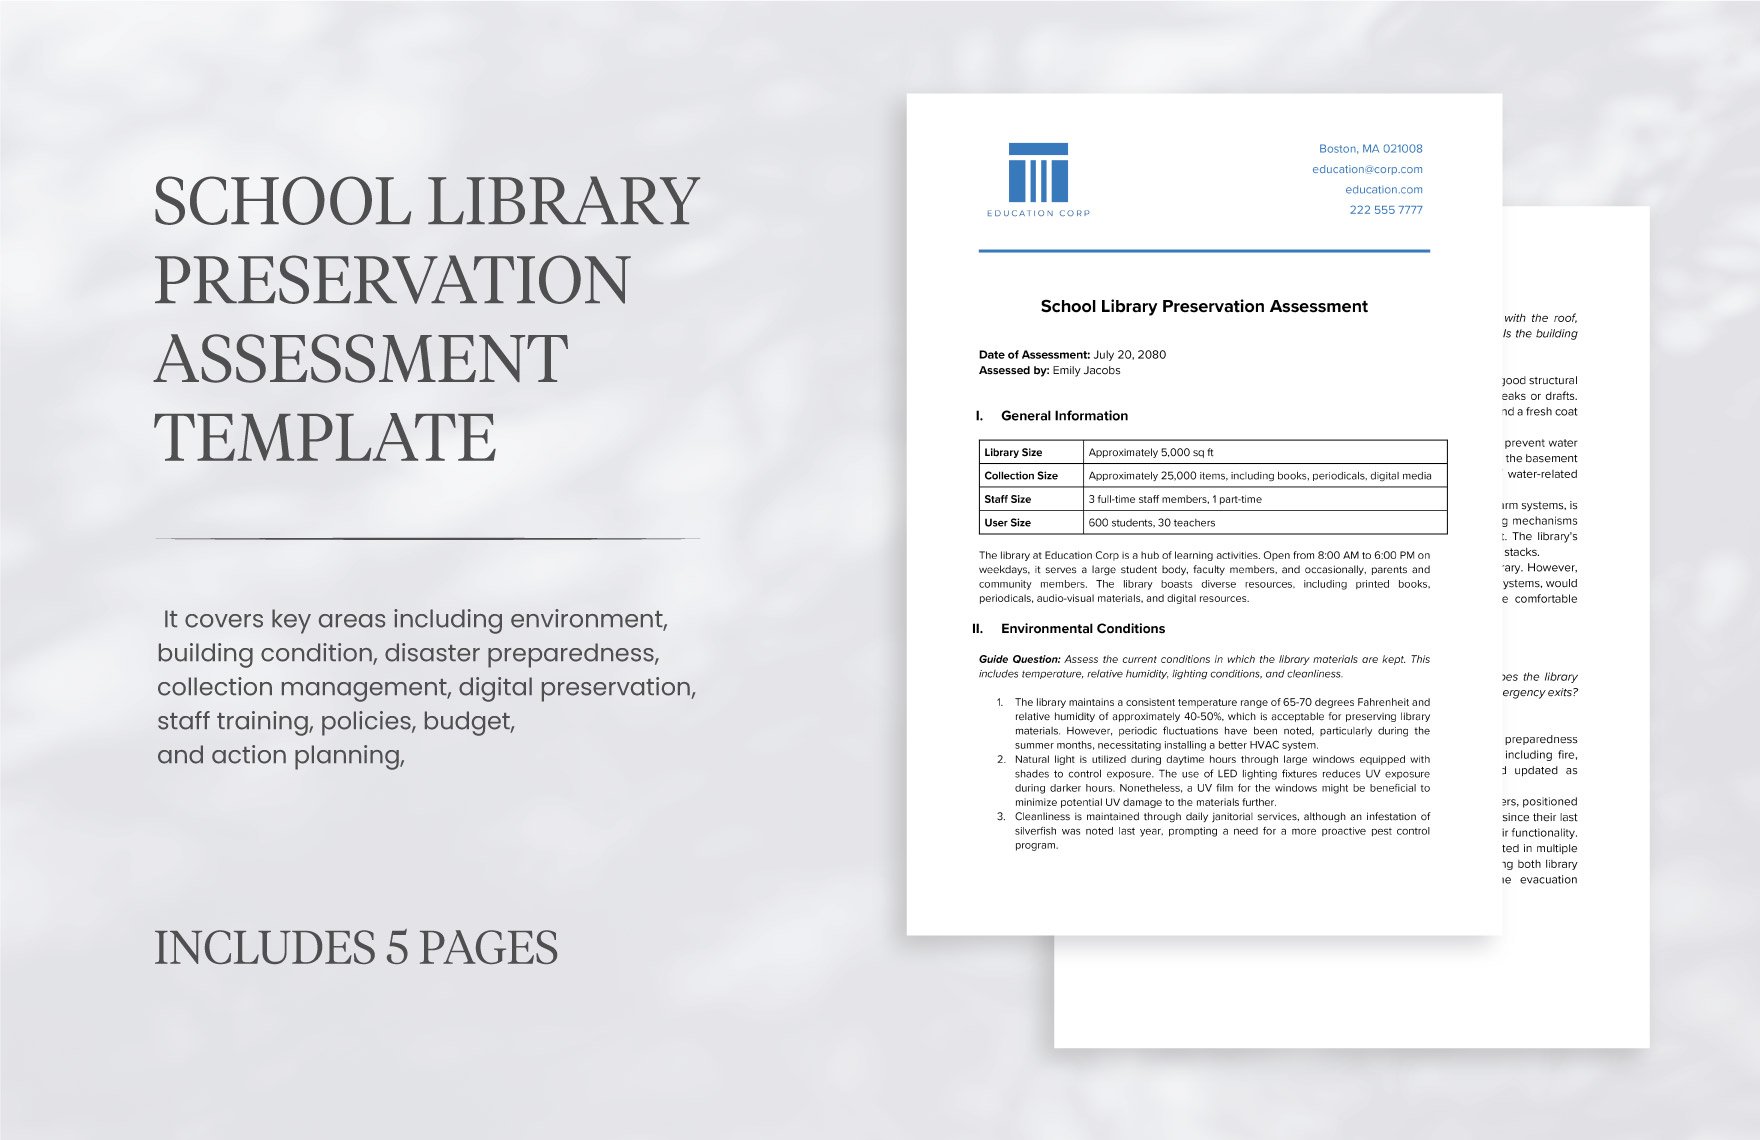 School Library Preservation Assessment Template